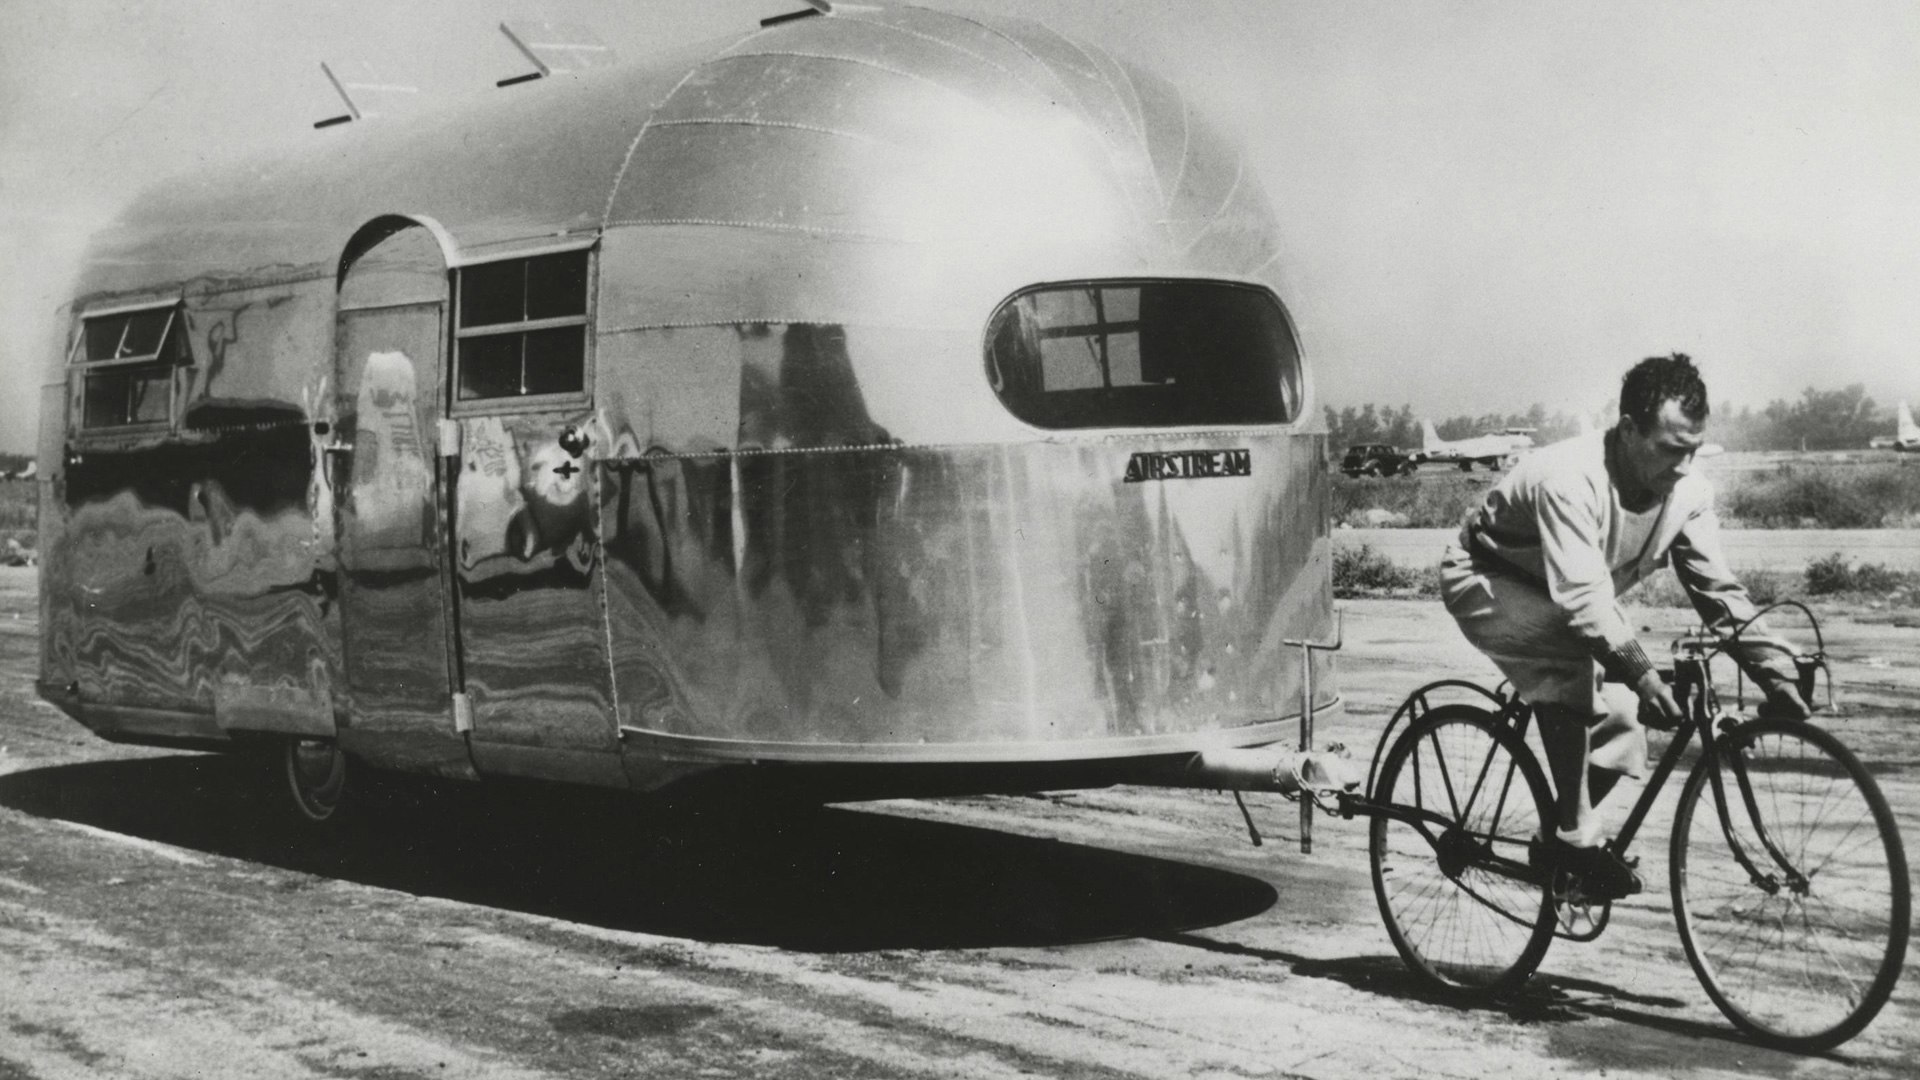 Wally-Byam-Airstream-history-1947-pulled-by-French-cyclist-Alfred-Letourneur